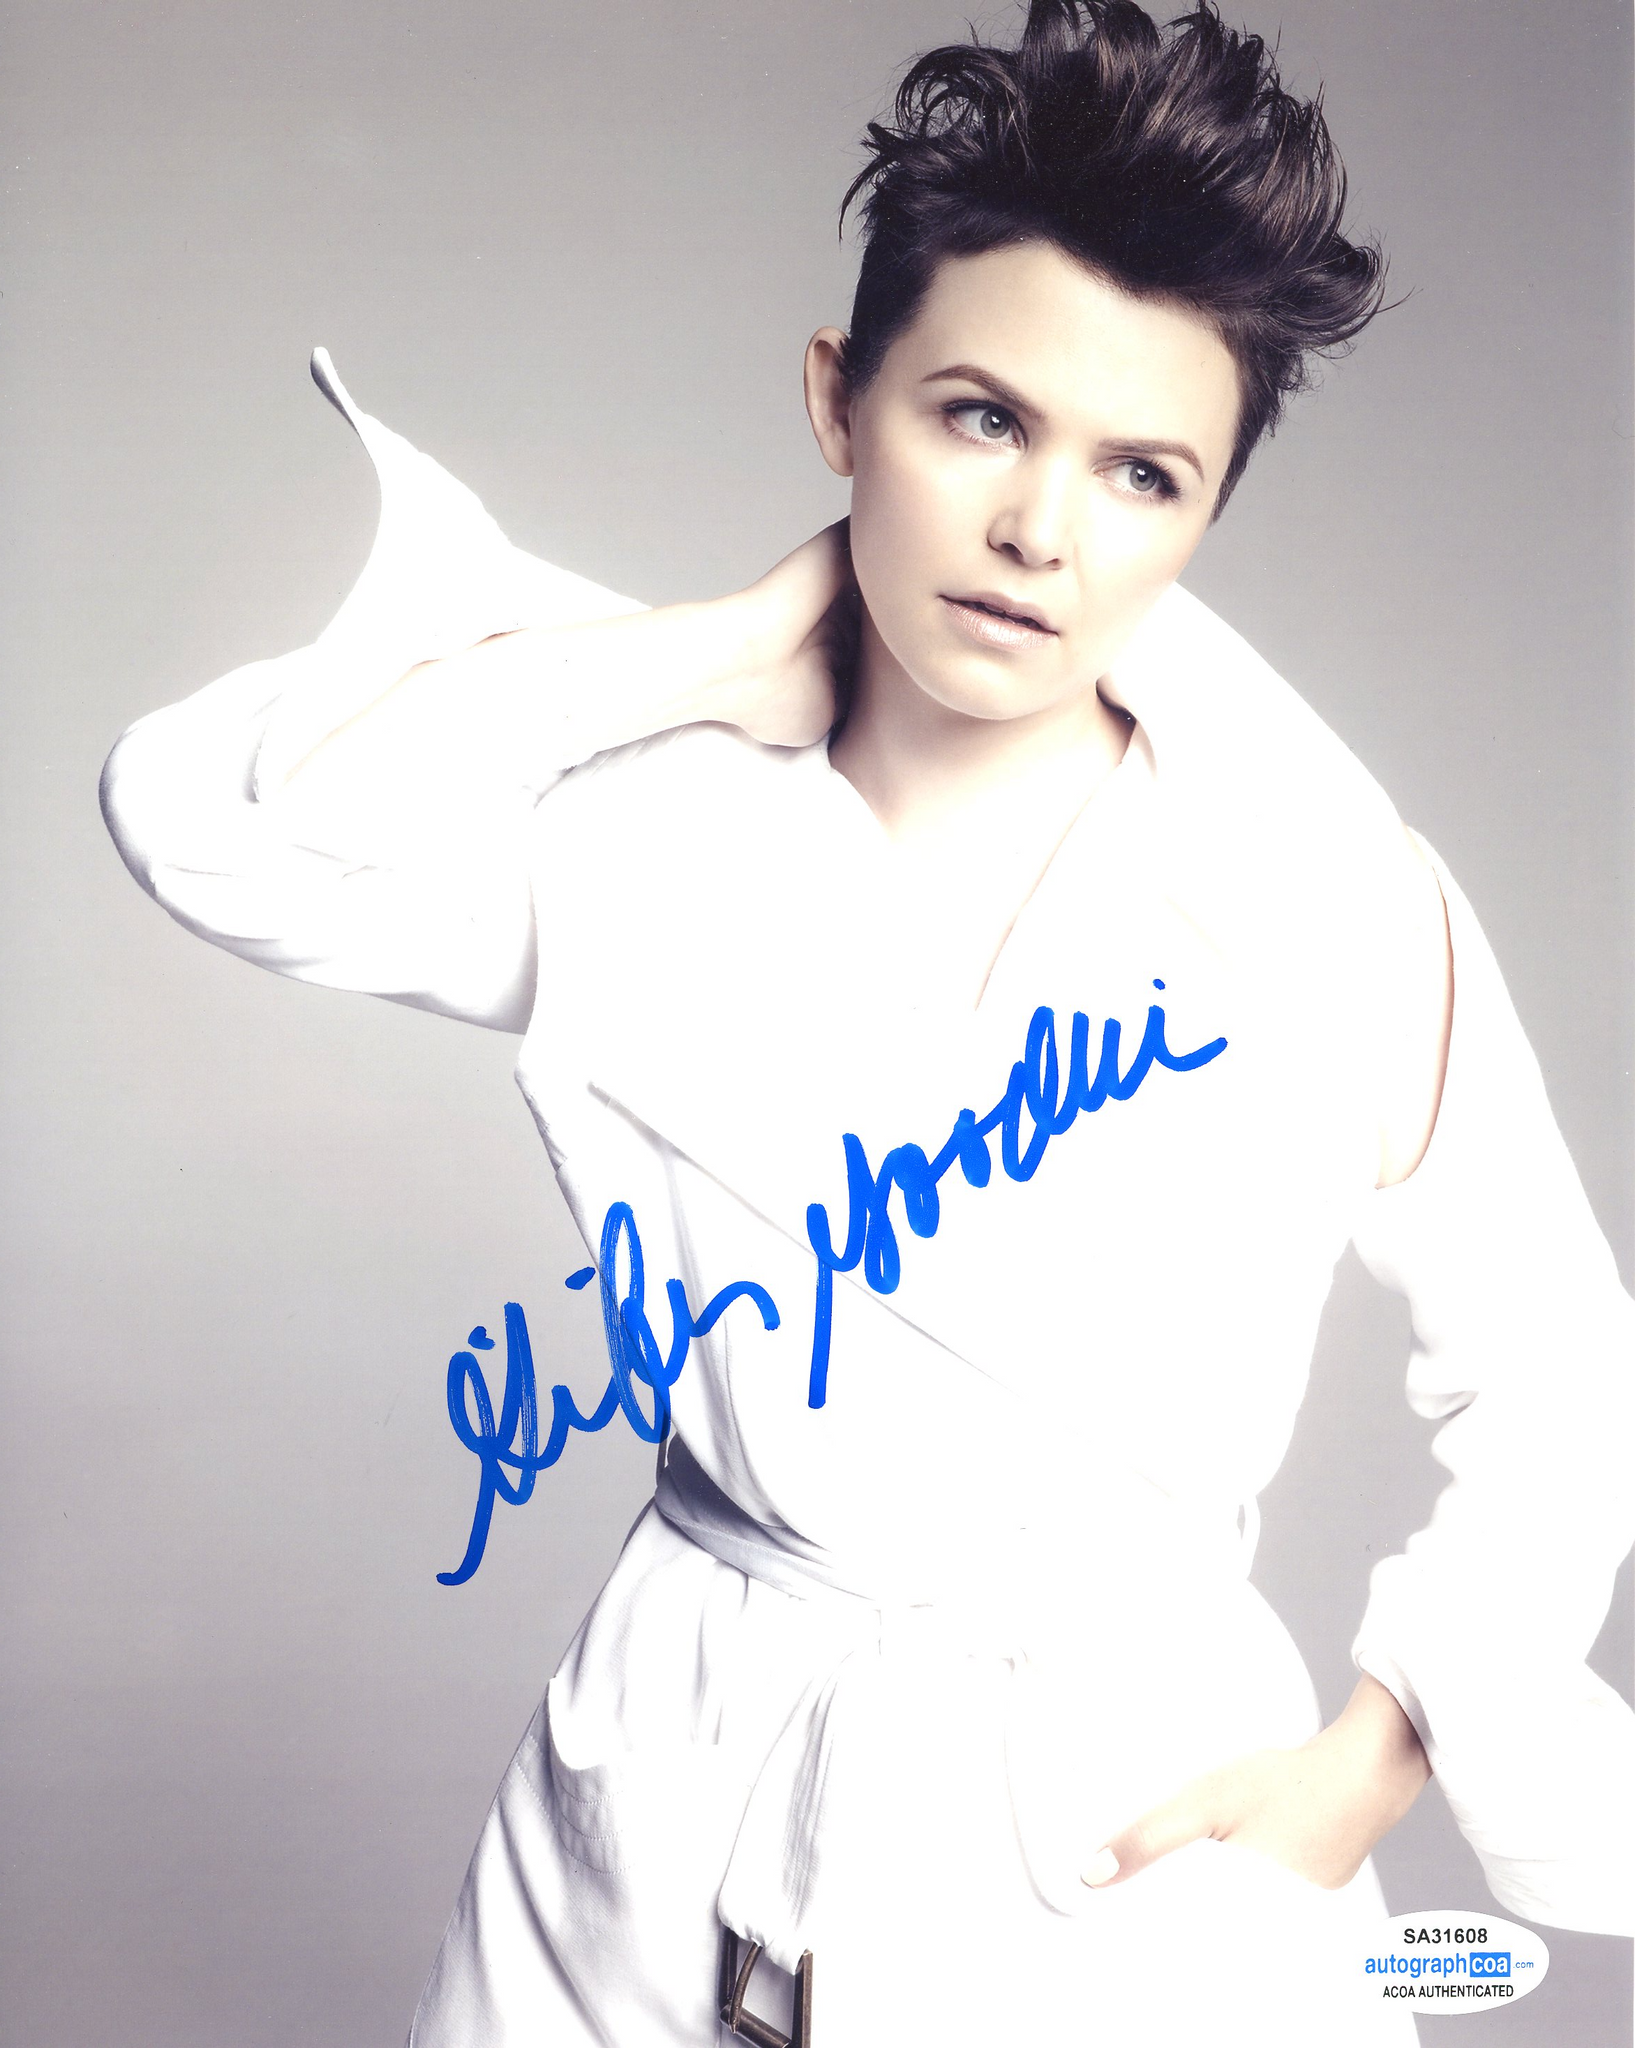 Ginnifer Goodwin Sexy Signed Autograph 8x10 Photo ACOA - Outlaw Hobbies Authentic Autographs